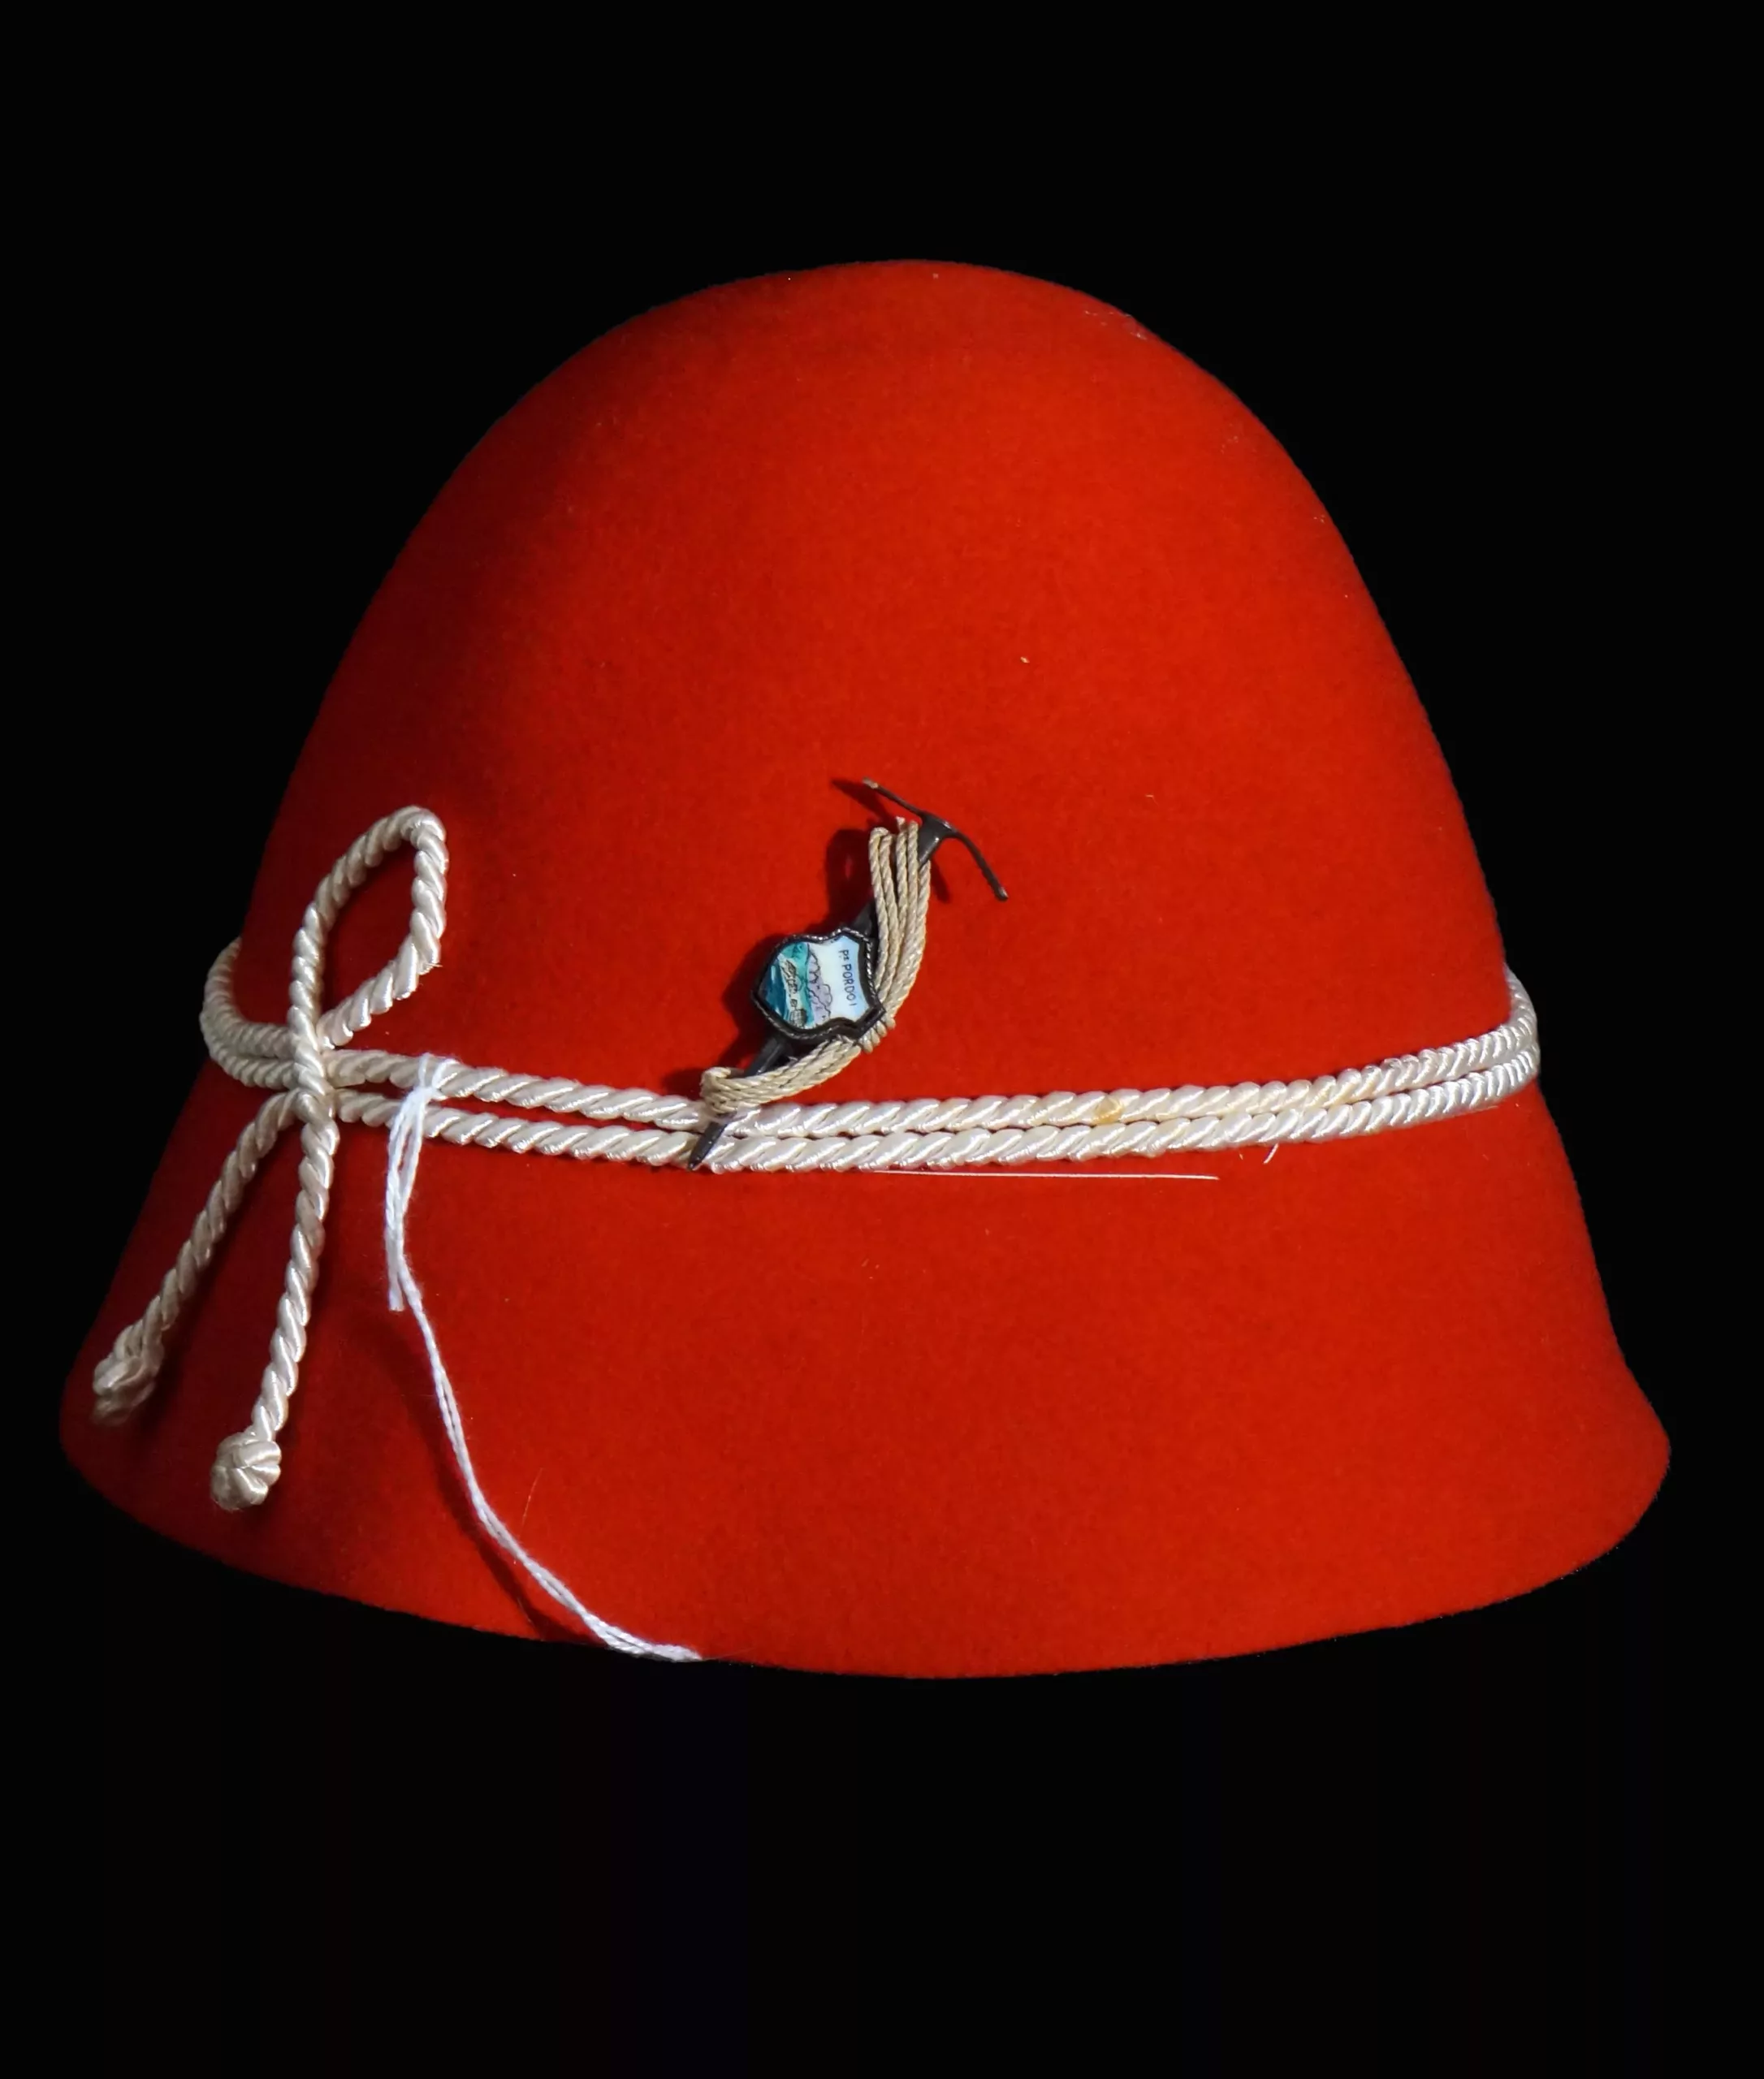 Beatrice "Bebe" Haemmerle's cloche hat with Austrian rock-climber's pin.